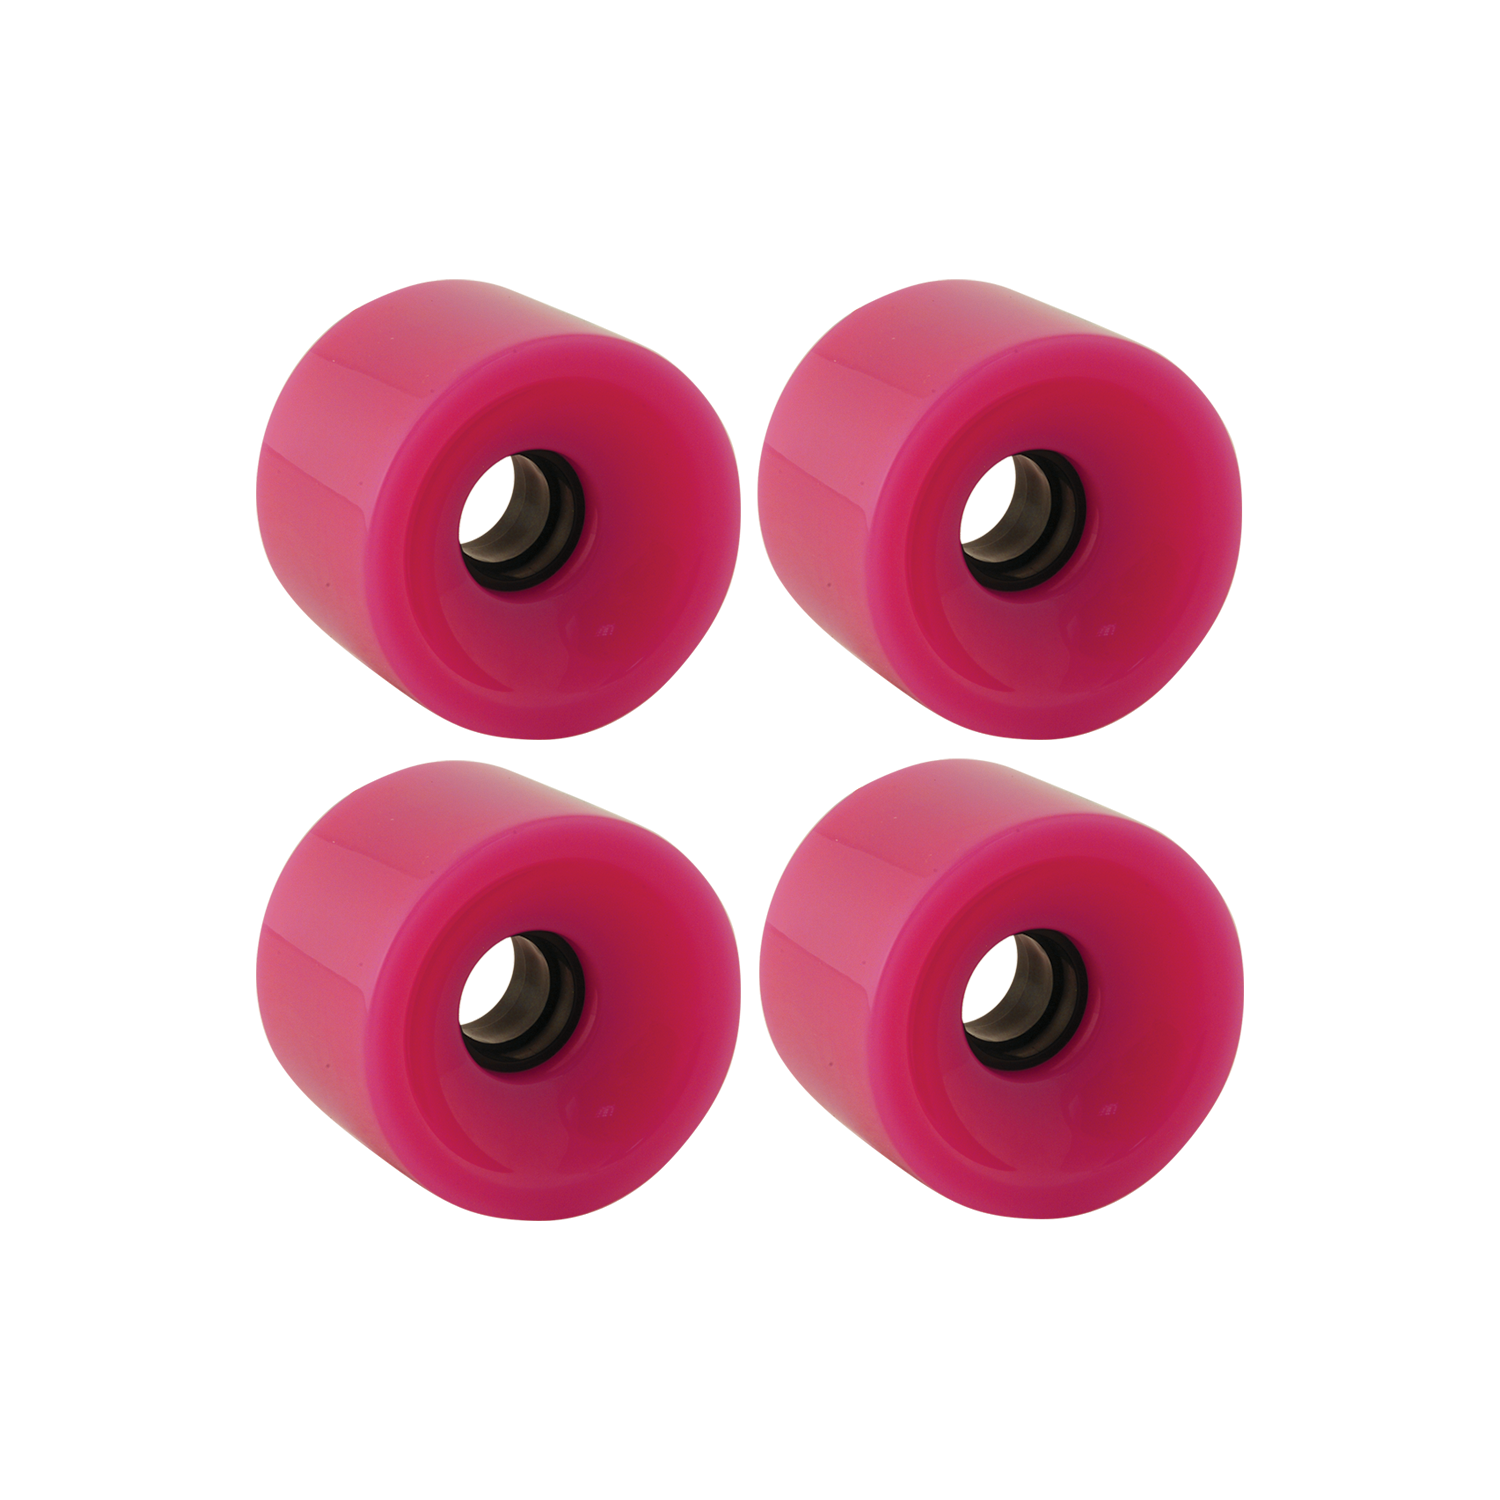 BLANK CRUISER WHEEL 70MM 78A ASSORTED COLORS